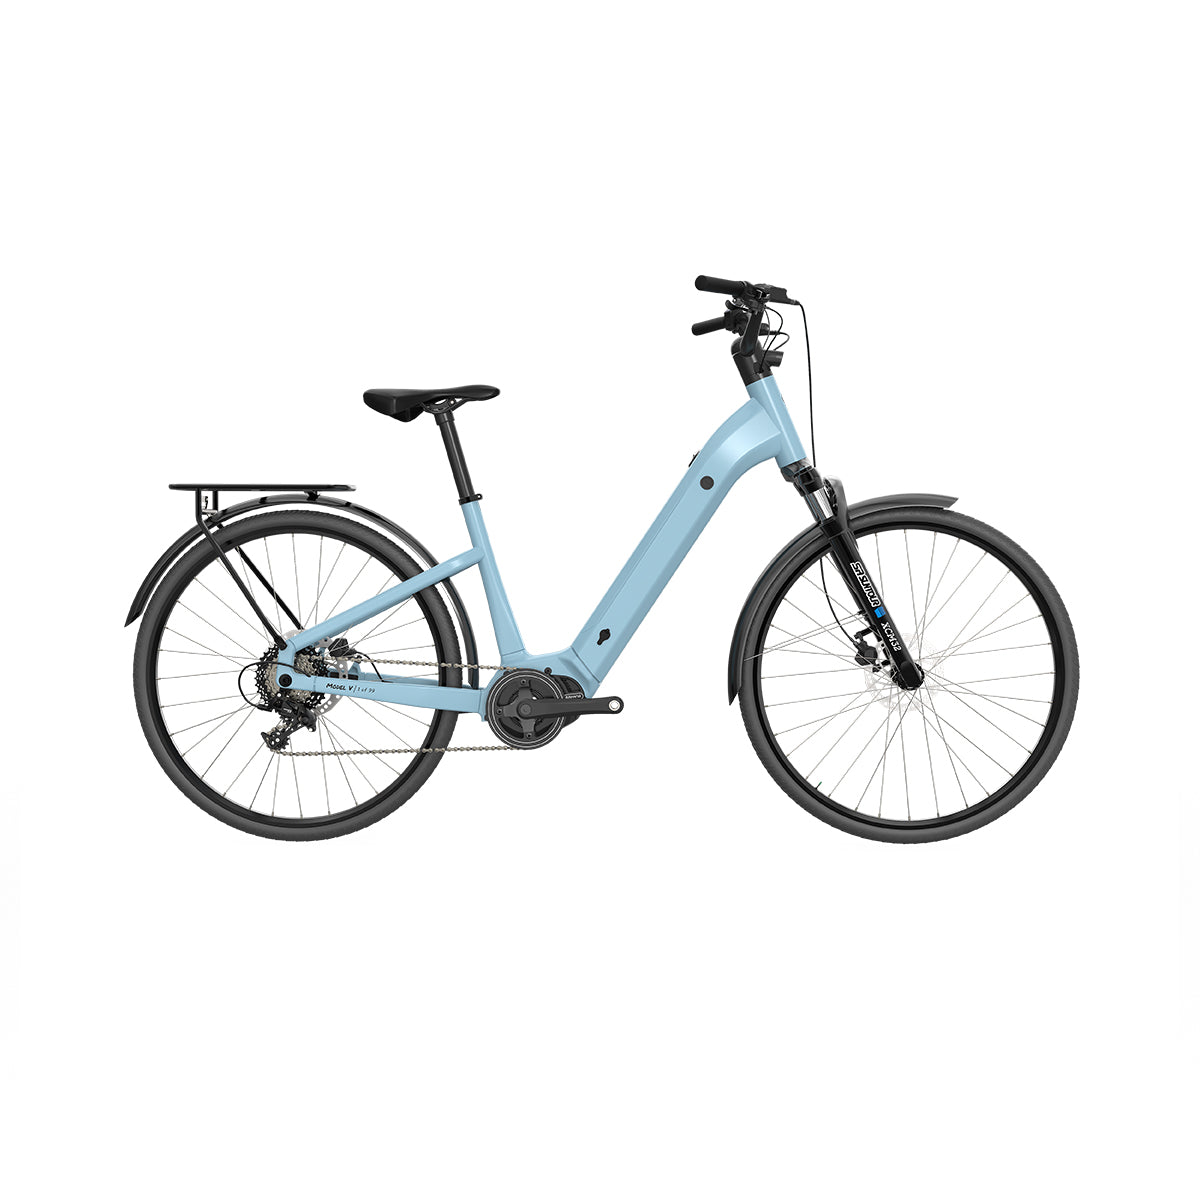 Experience Comfort and Performance Accolmile Model V City E-Bike_1.jpg__PID:9a44d534-a602-48b2-b1cc-e2d961c7f9f7